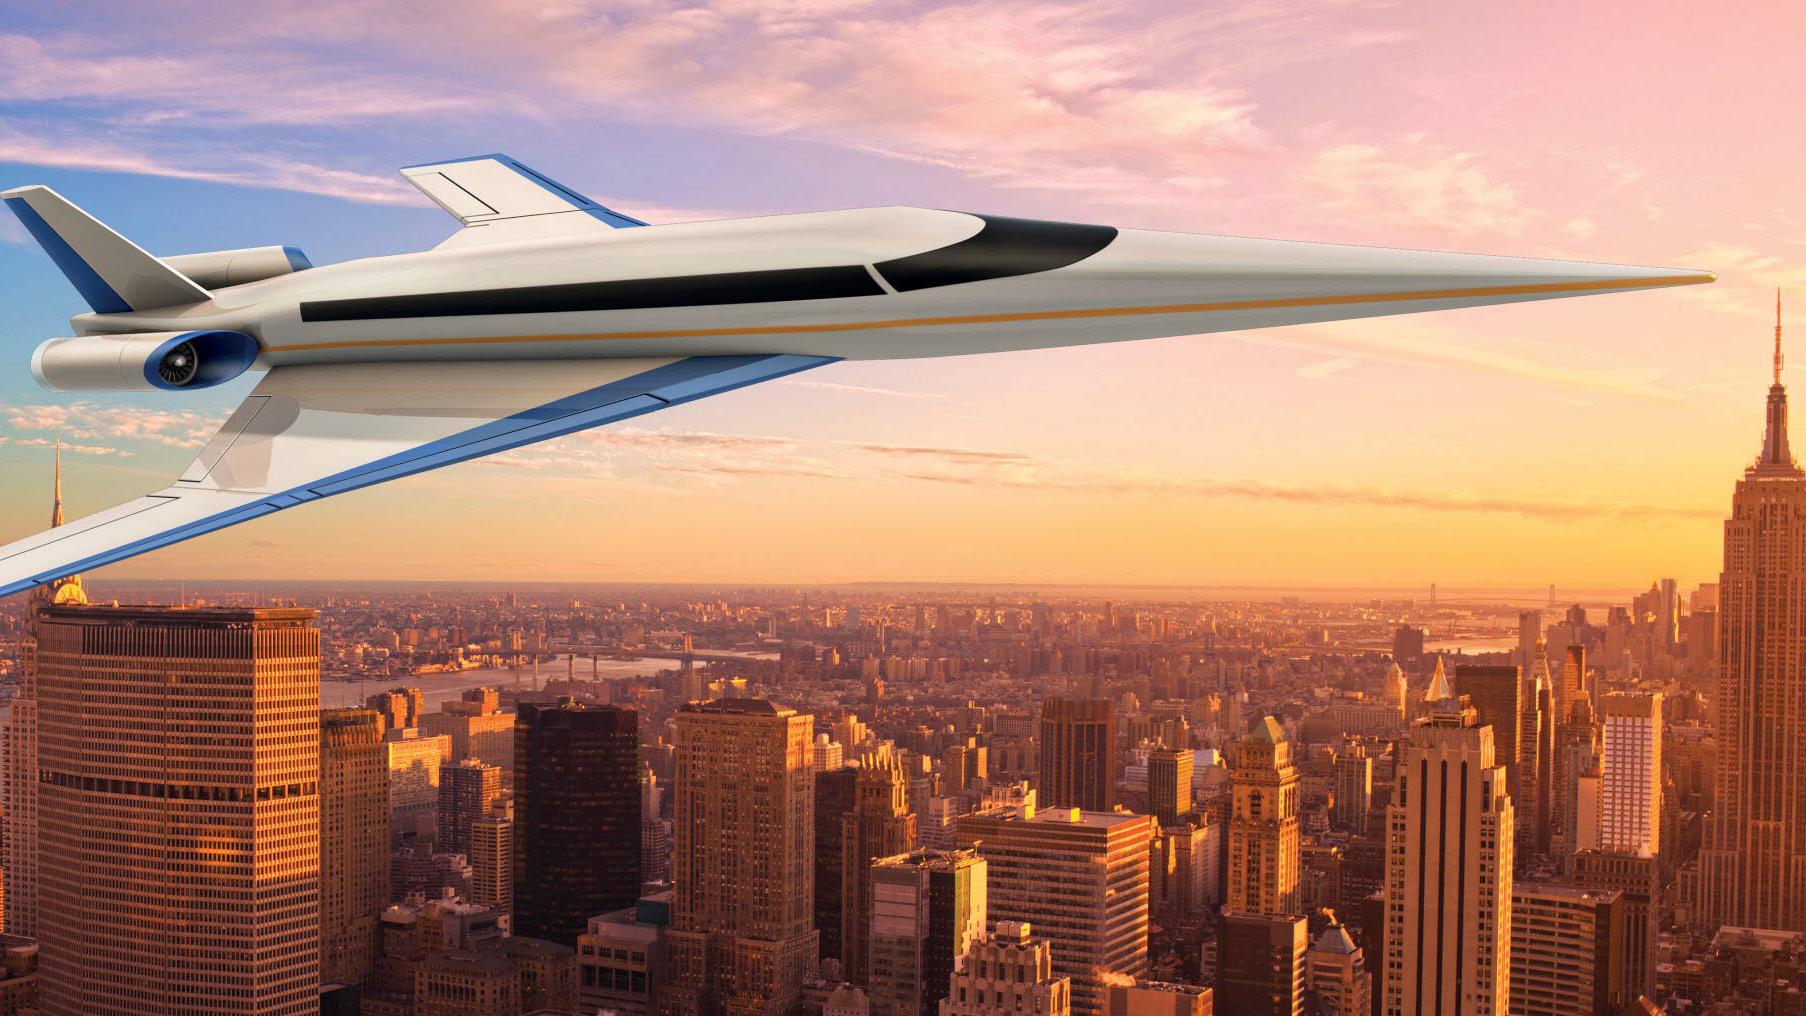 Spike Aerospace's supersonic jet would carry 18 passengers and travel at speeds around 1,100 mph. 